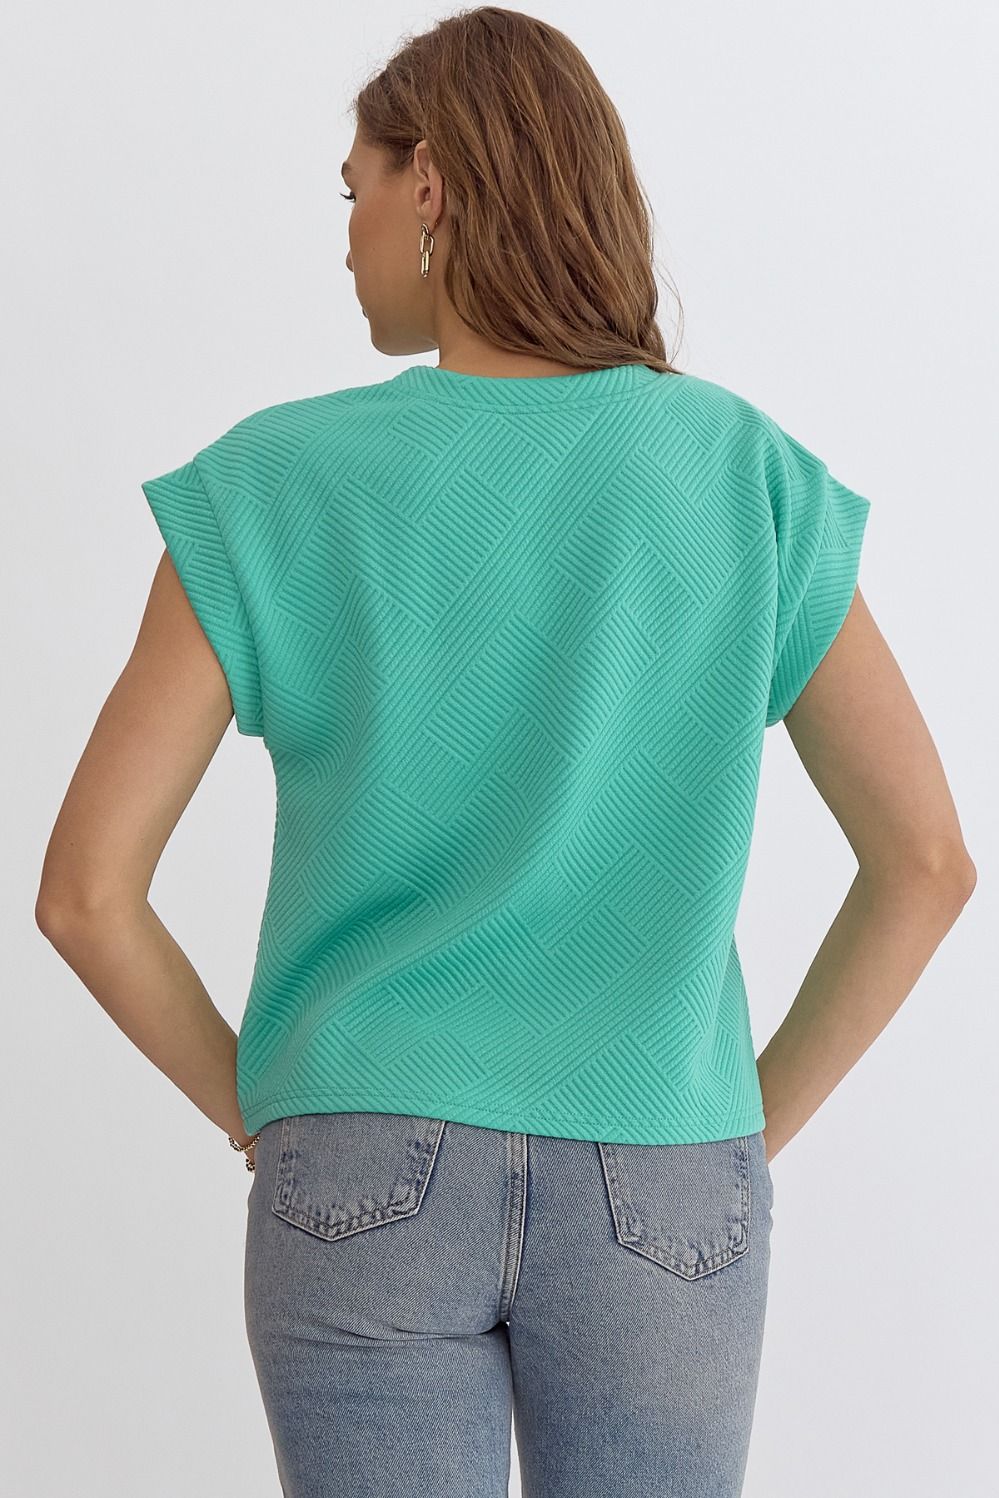 Trail Less Traveled Top In Mint